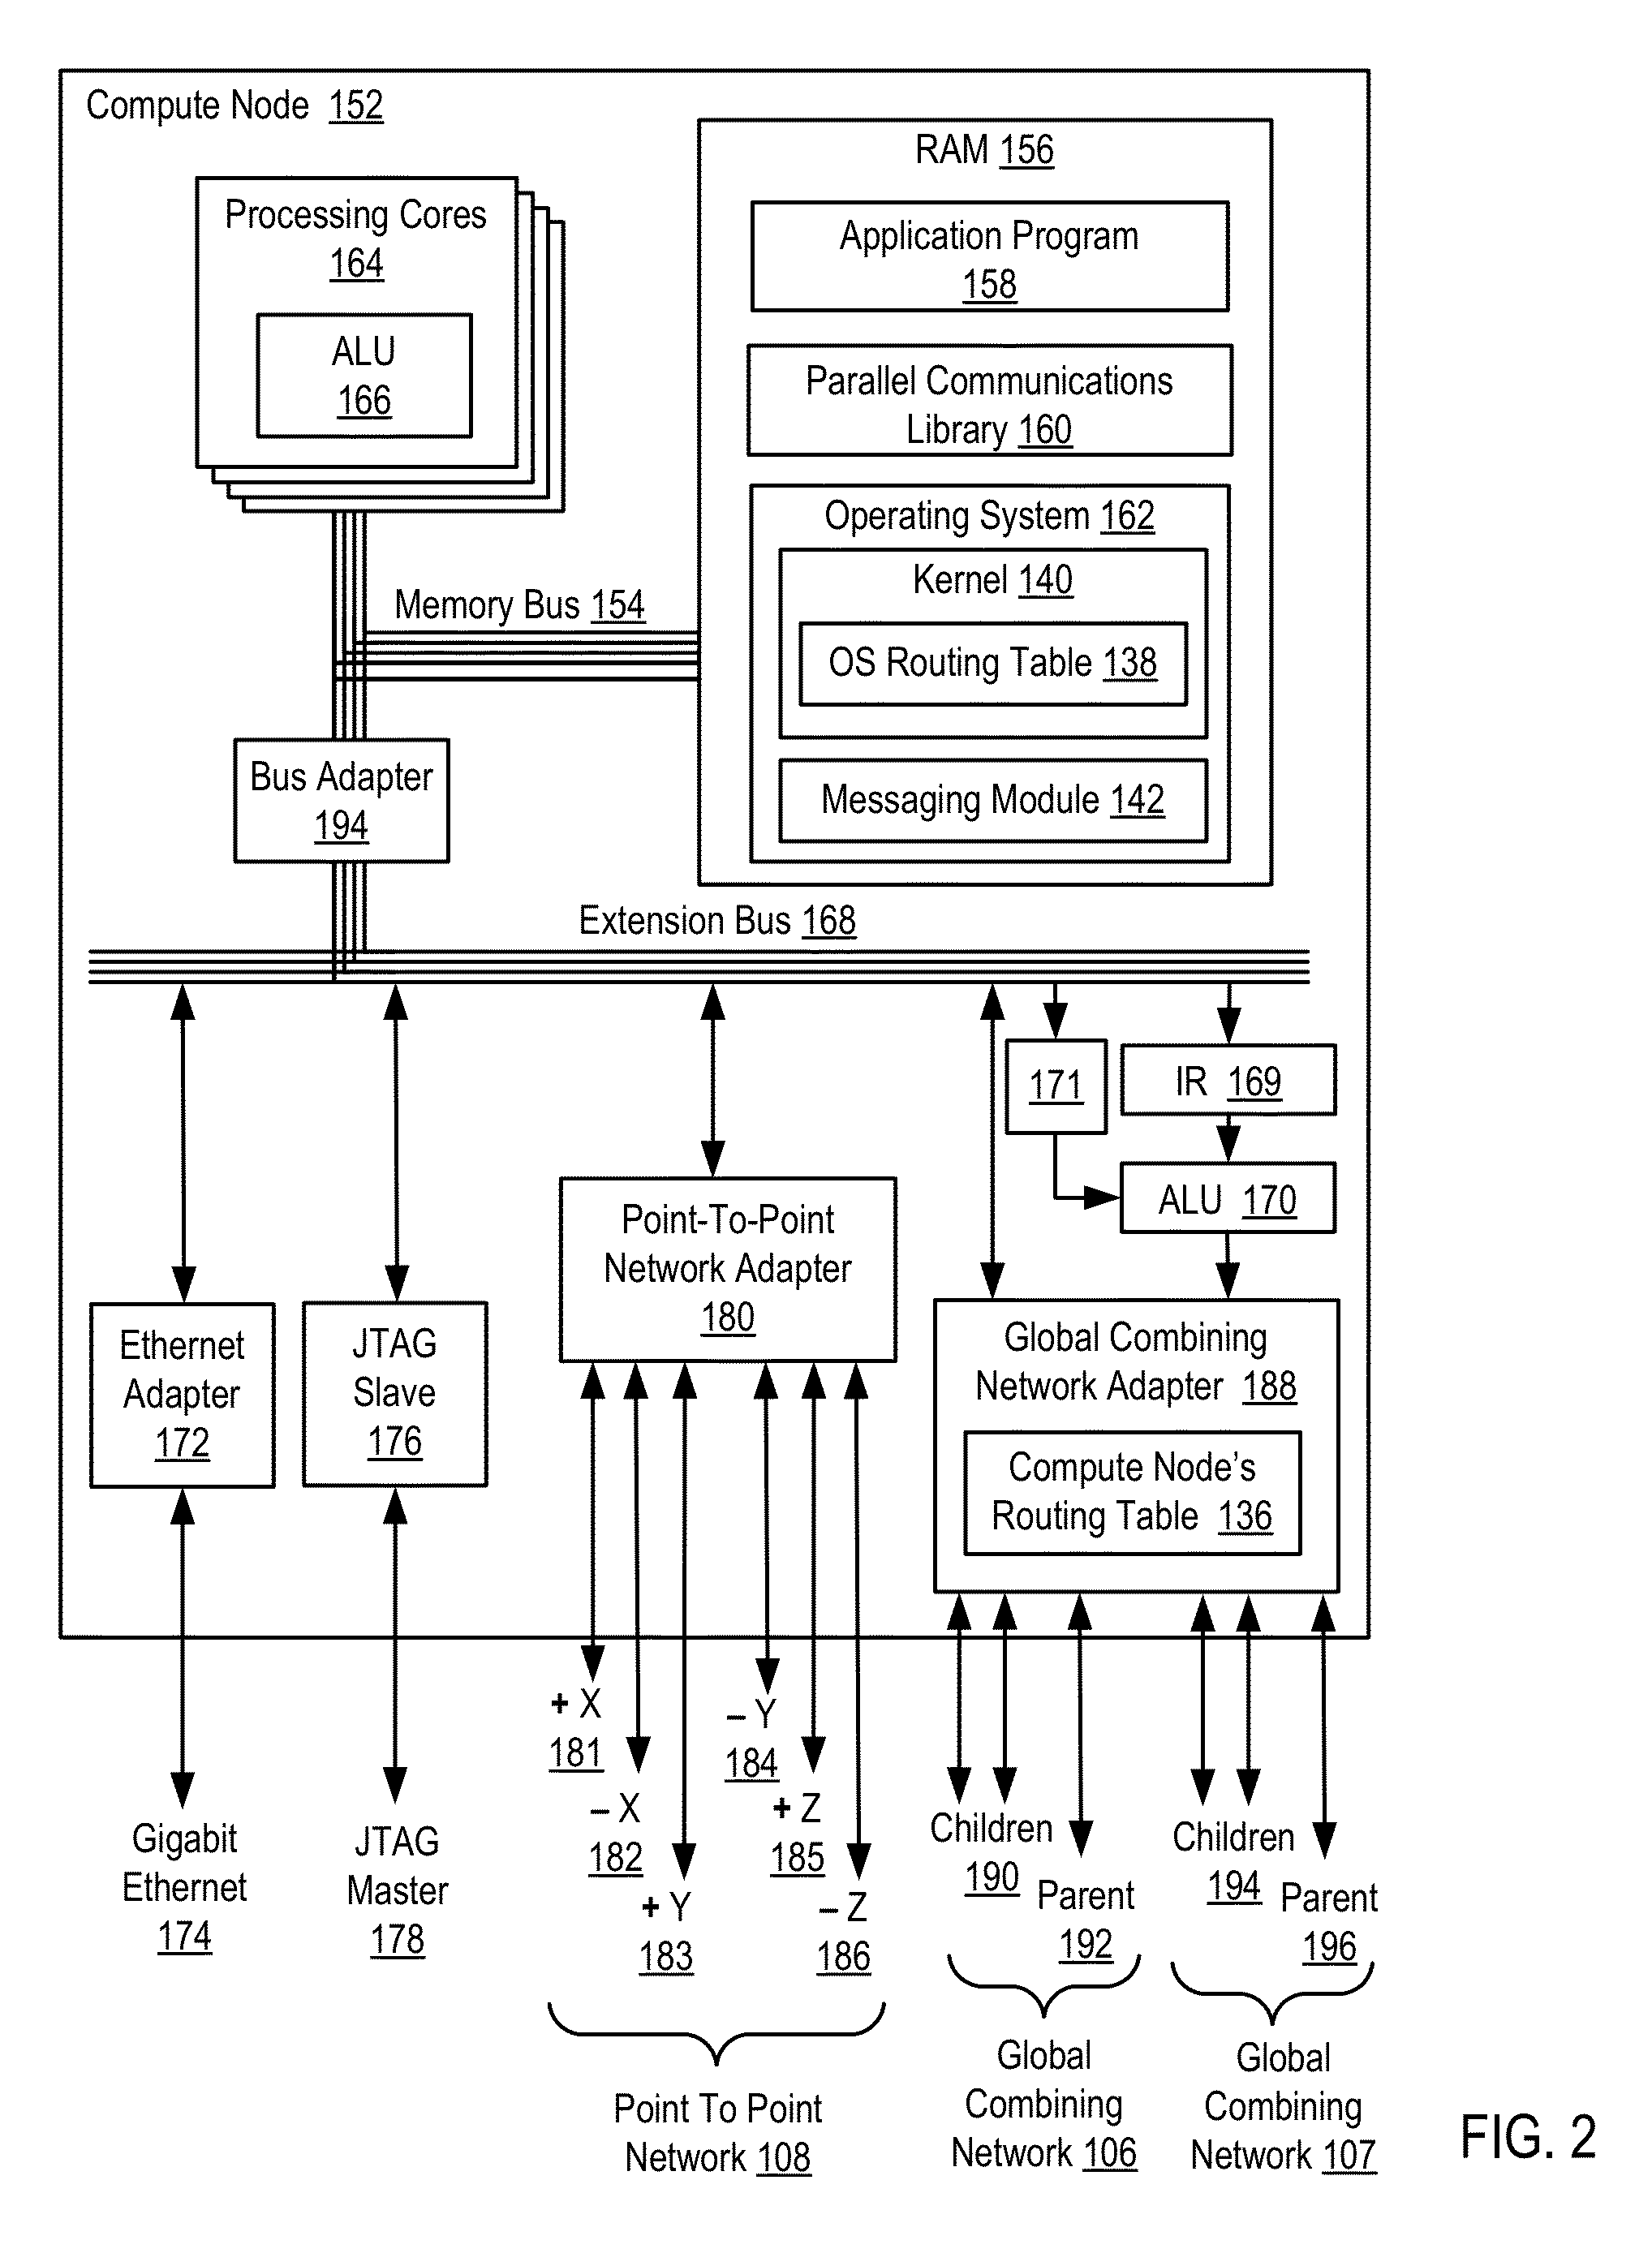 Routing data communications packets in a parallel computer